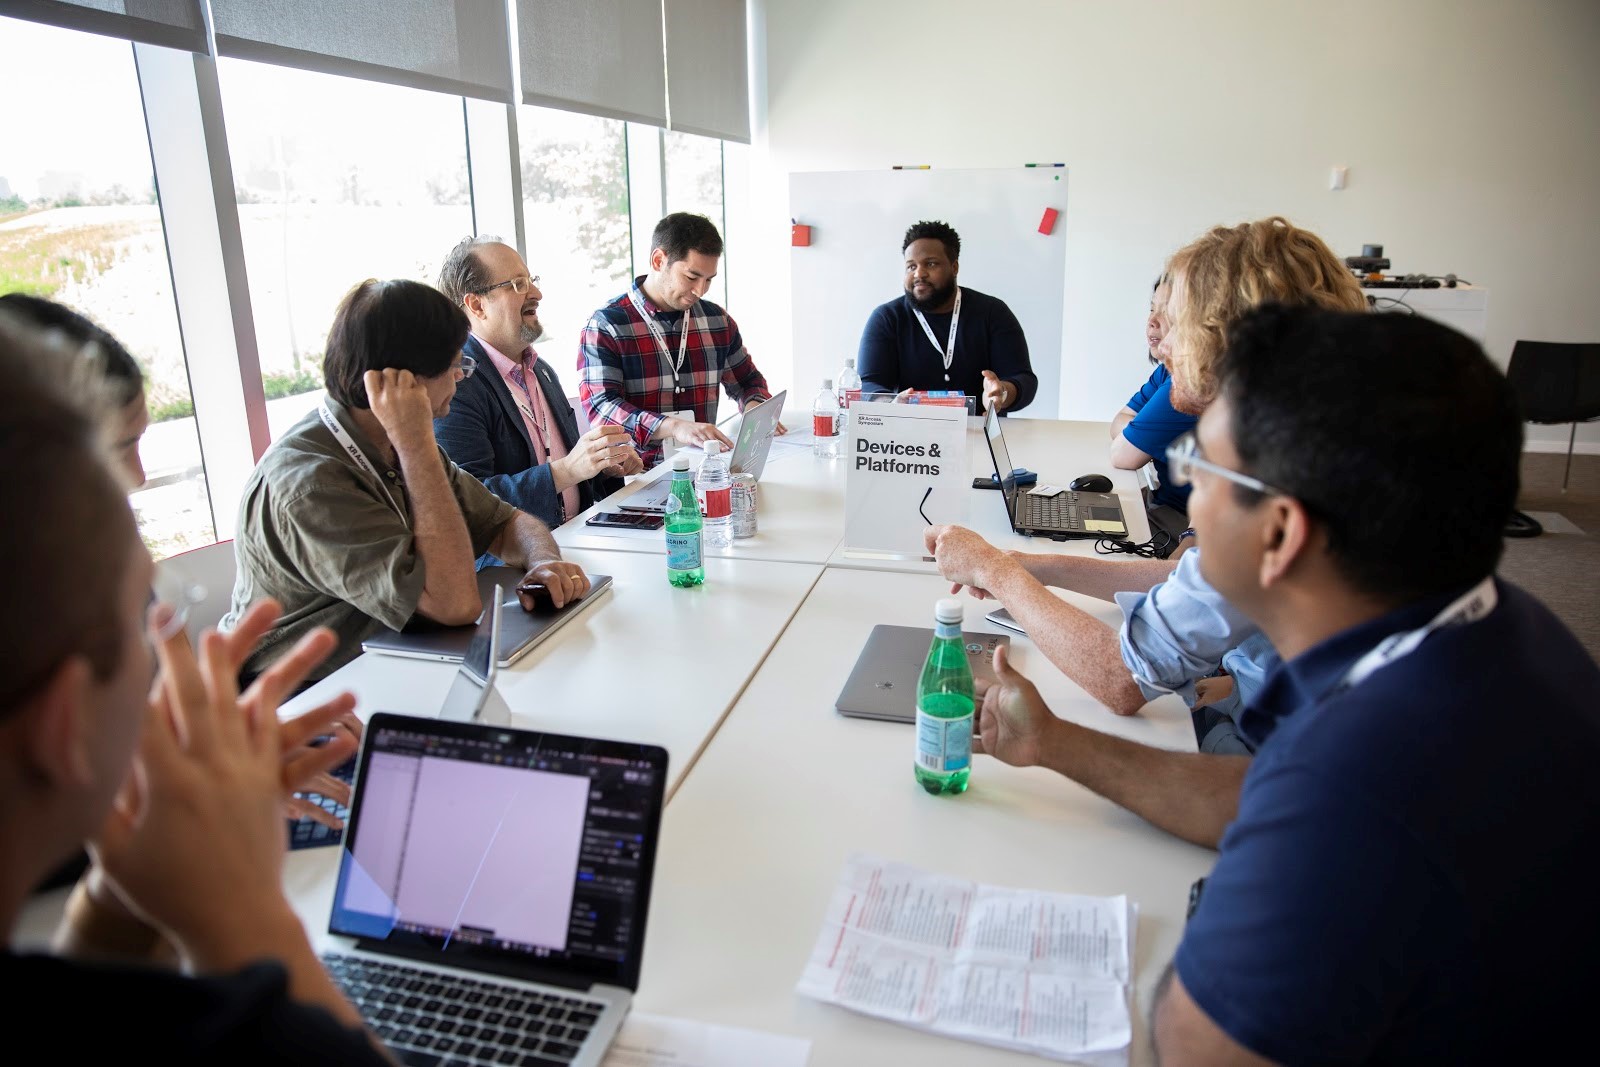 Bill Curtis-Davidson participating in a Devices & Platforms breakout session with a diverse group of industry participants during the 2019 XR Access Symposium in New York, July 2019.